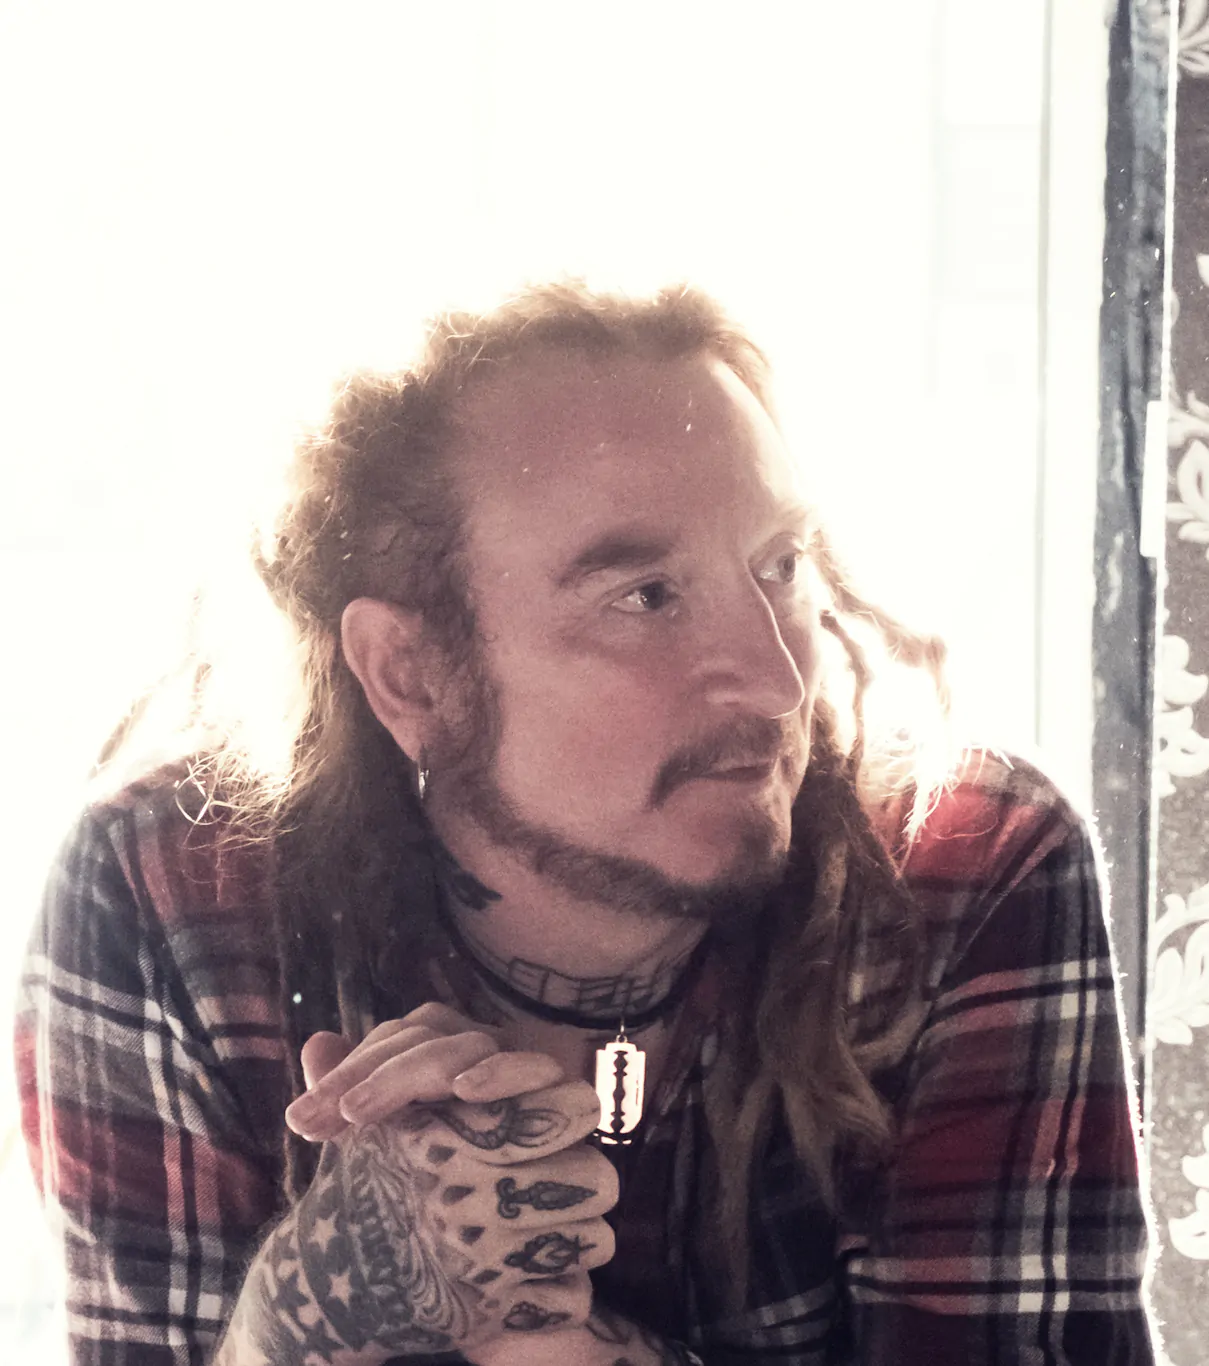 INTERVIEW: Ginger Wildheart - “Good lyrics always come from bad times” 2